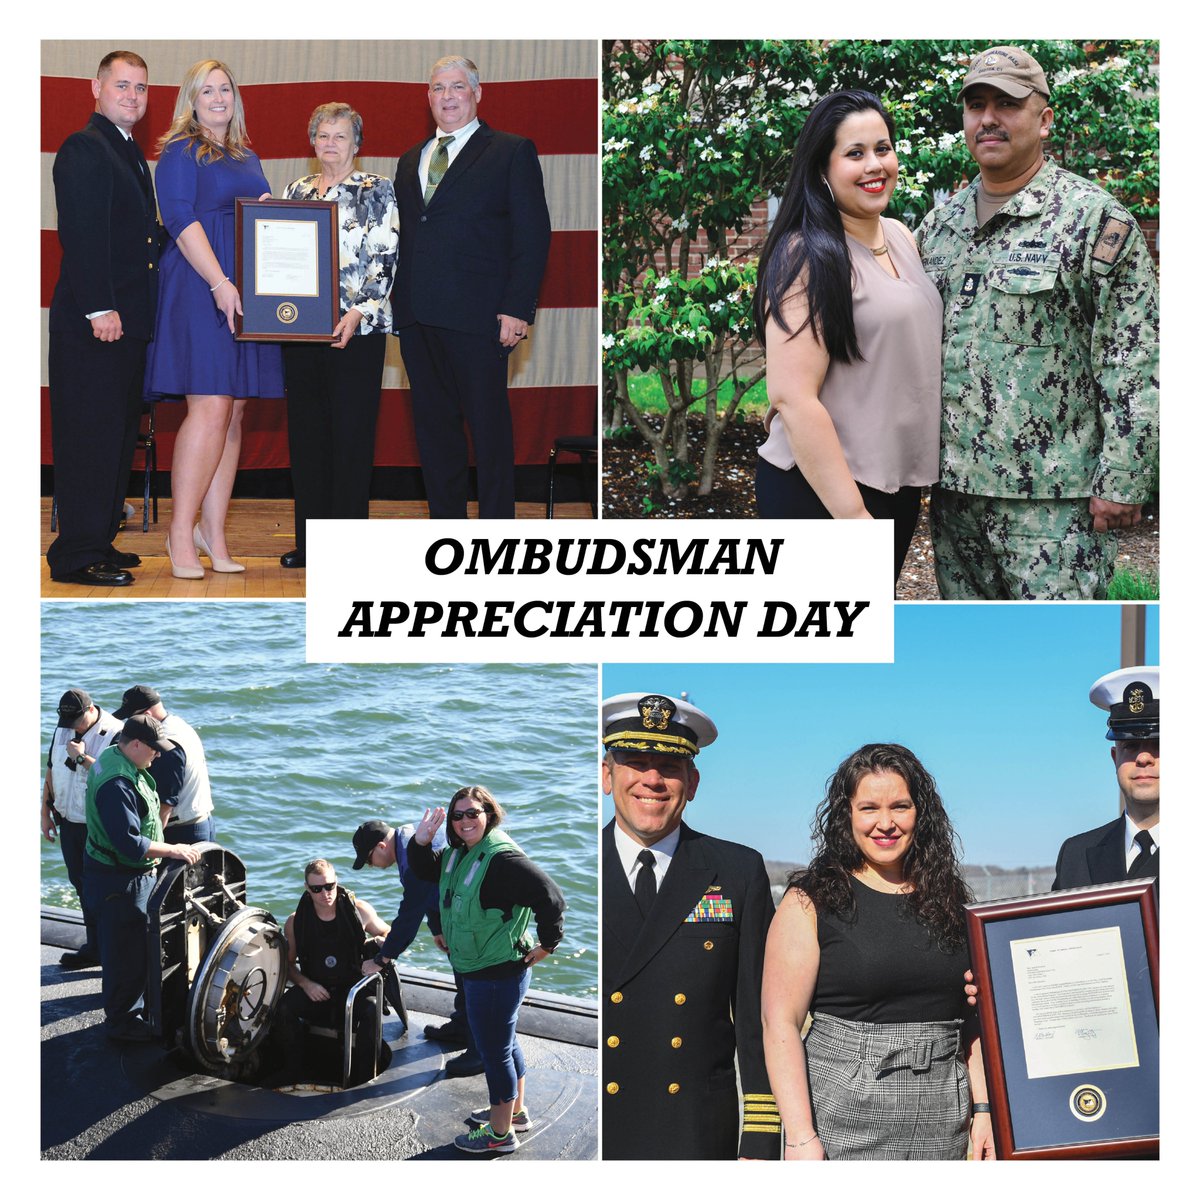 On this Ombudsman Appreciation Day, we'd like to take the time to thank all the command ombudsman for their continuous dedication and support to our Submarine Force Sailors. Your selfless sacrifice underpins our families and ensures our Sailors are mission-focused at all times!